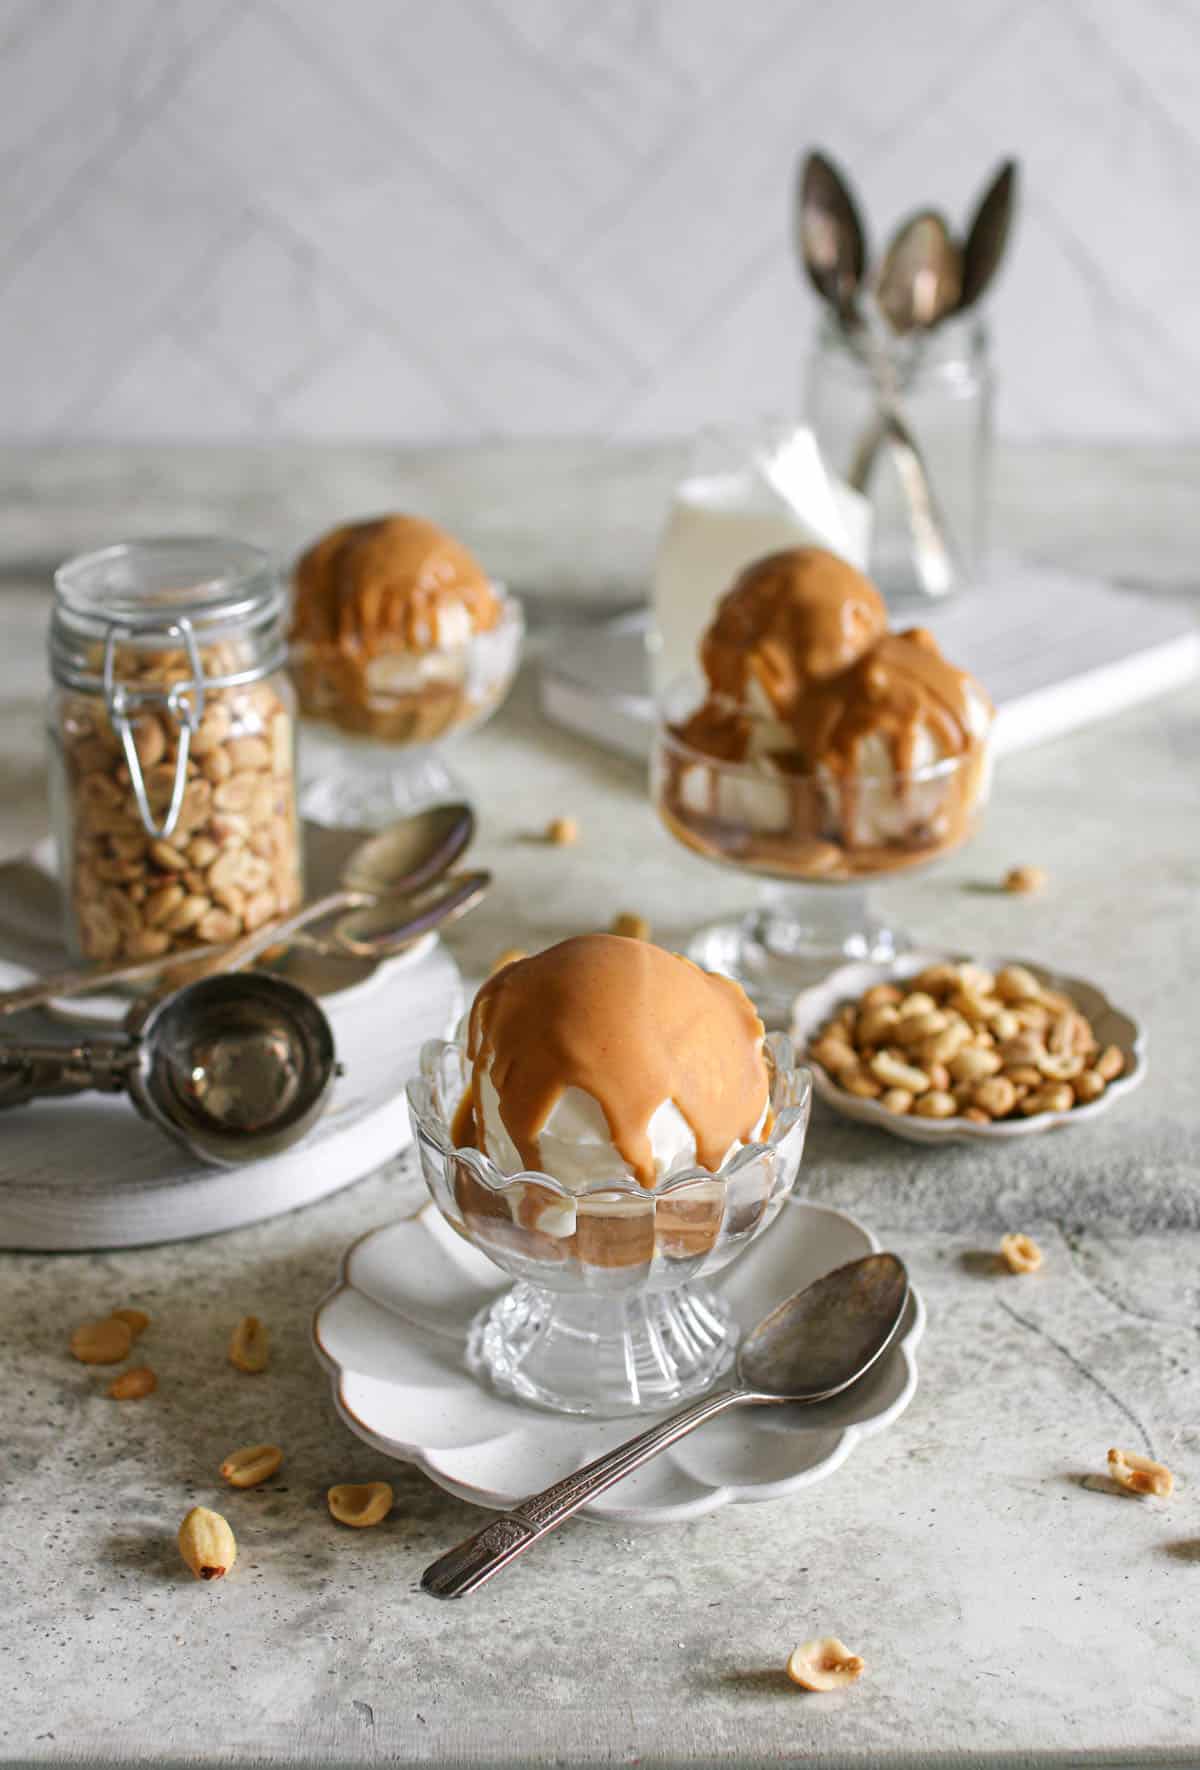 A large scoop of vanilla ice cream with peanut butter magic shell on a scalloped plate with an antique spoon. In the background are white wood boards, more ice cream, peanuts in assorted containers, etc. everything sits on a cement table with a white herringbone background.